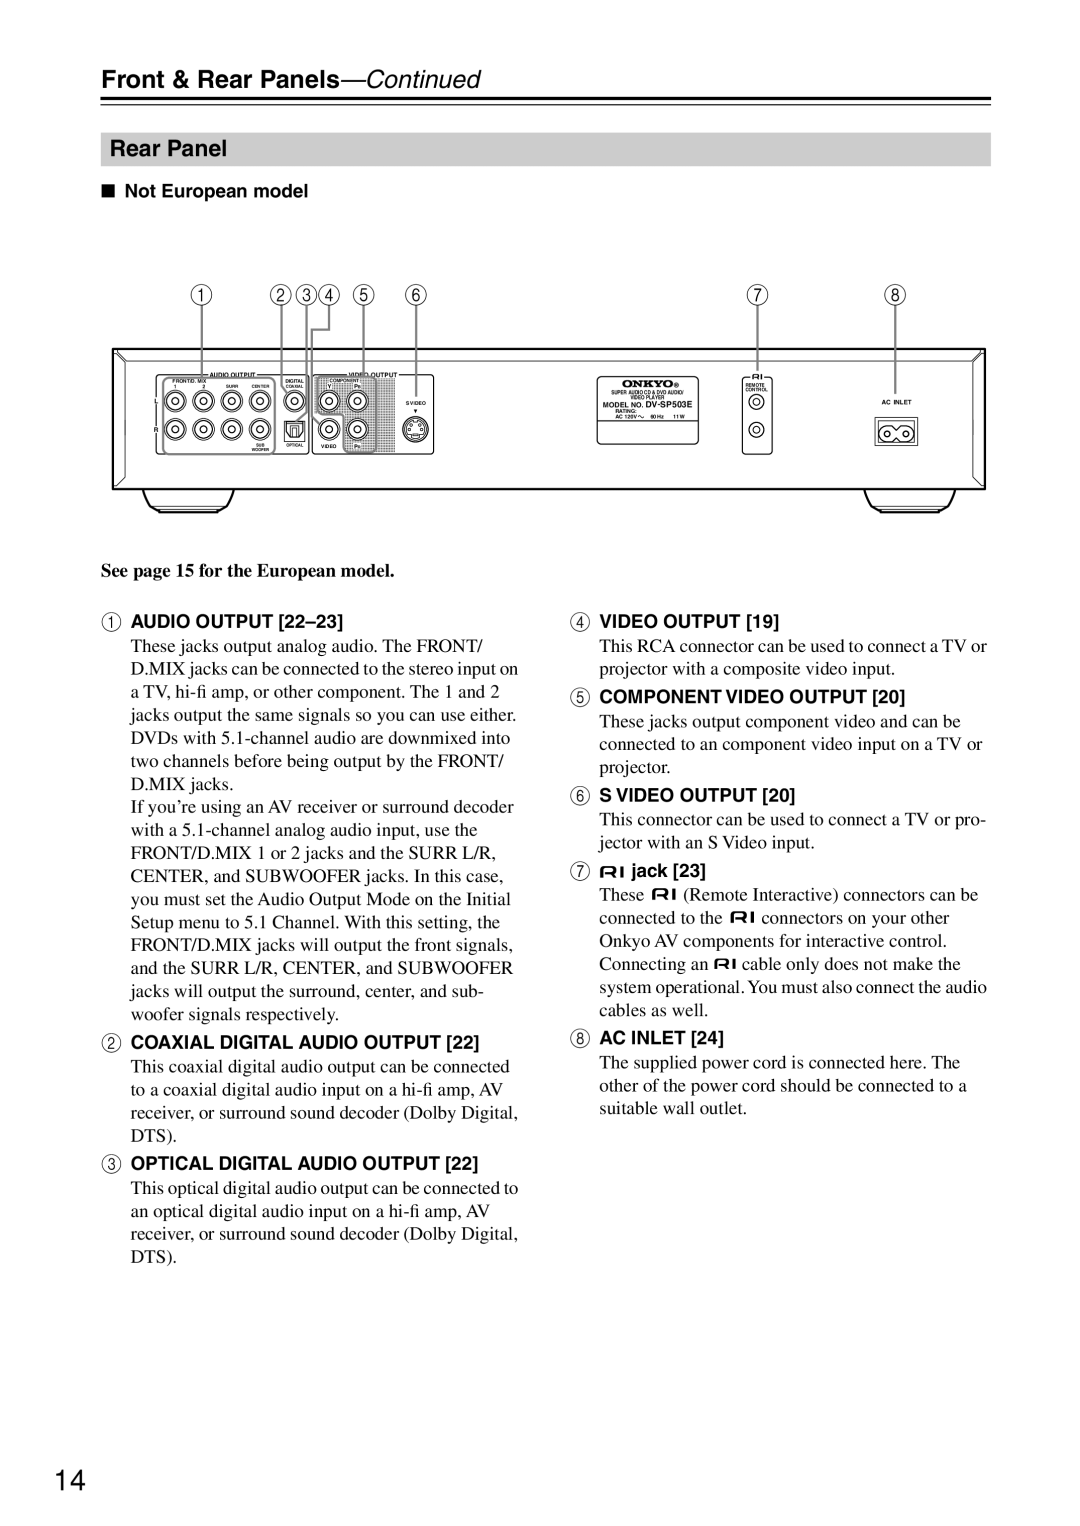 Onkyo DV-SP503E 1 234 5, Front & Rear Panels-Continued, Not European model, See page 15 for the European model, G jack 